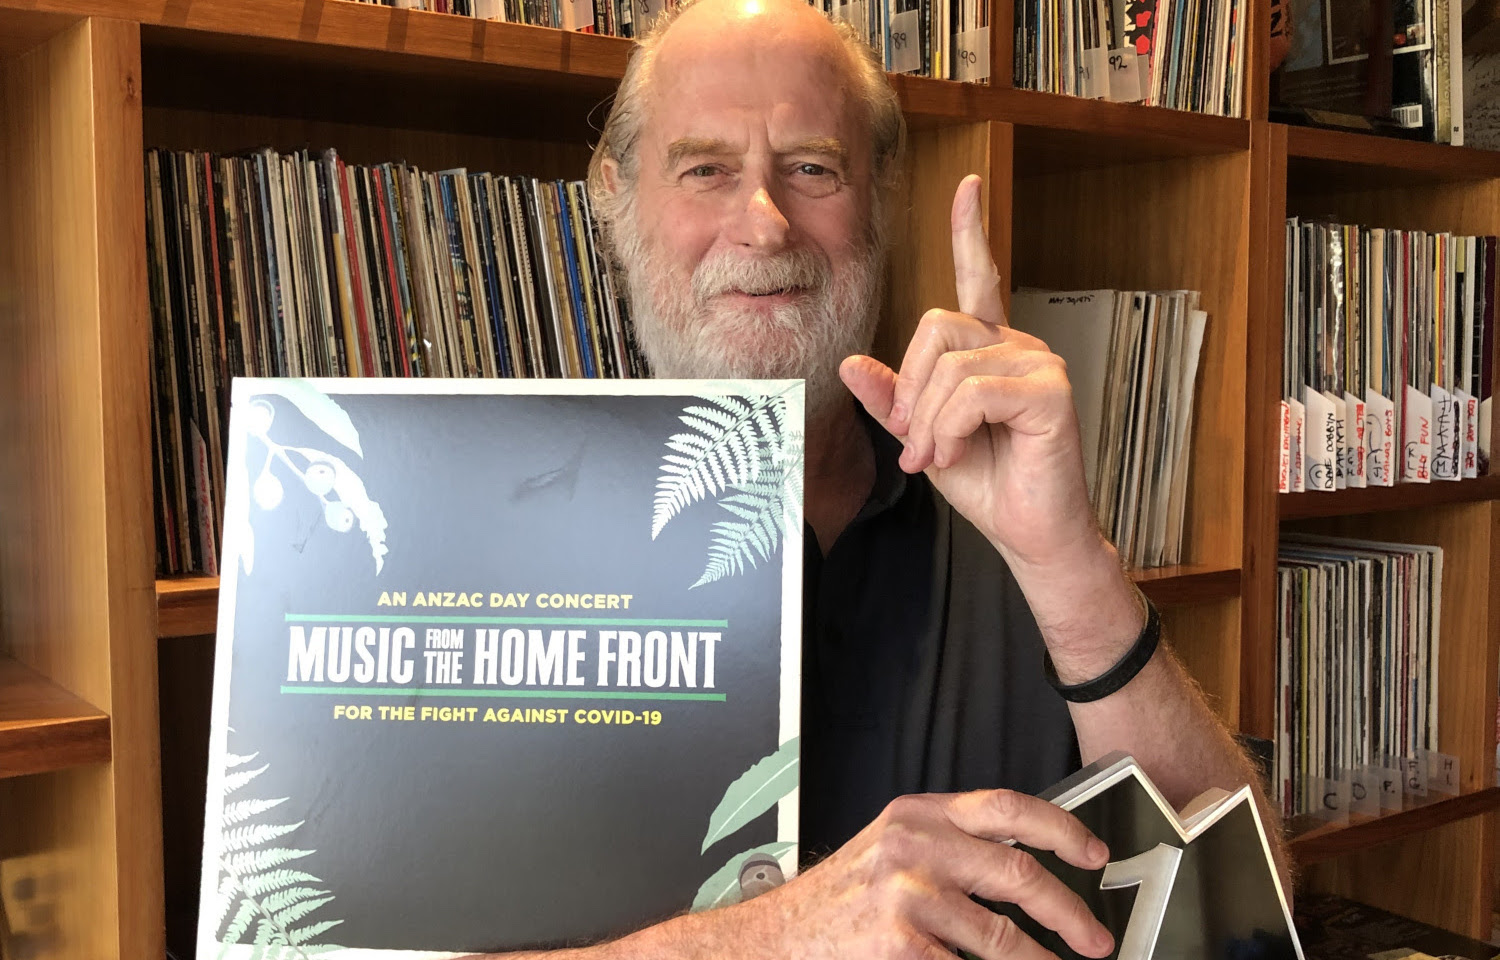 ‘Music From The Home Front’ back to ARIA summit after vinyl release